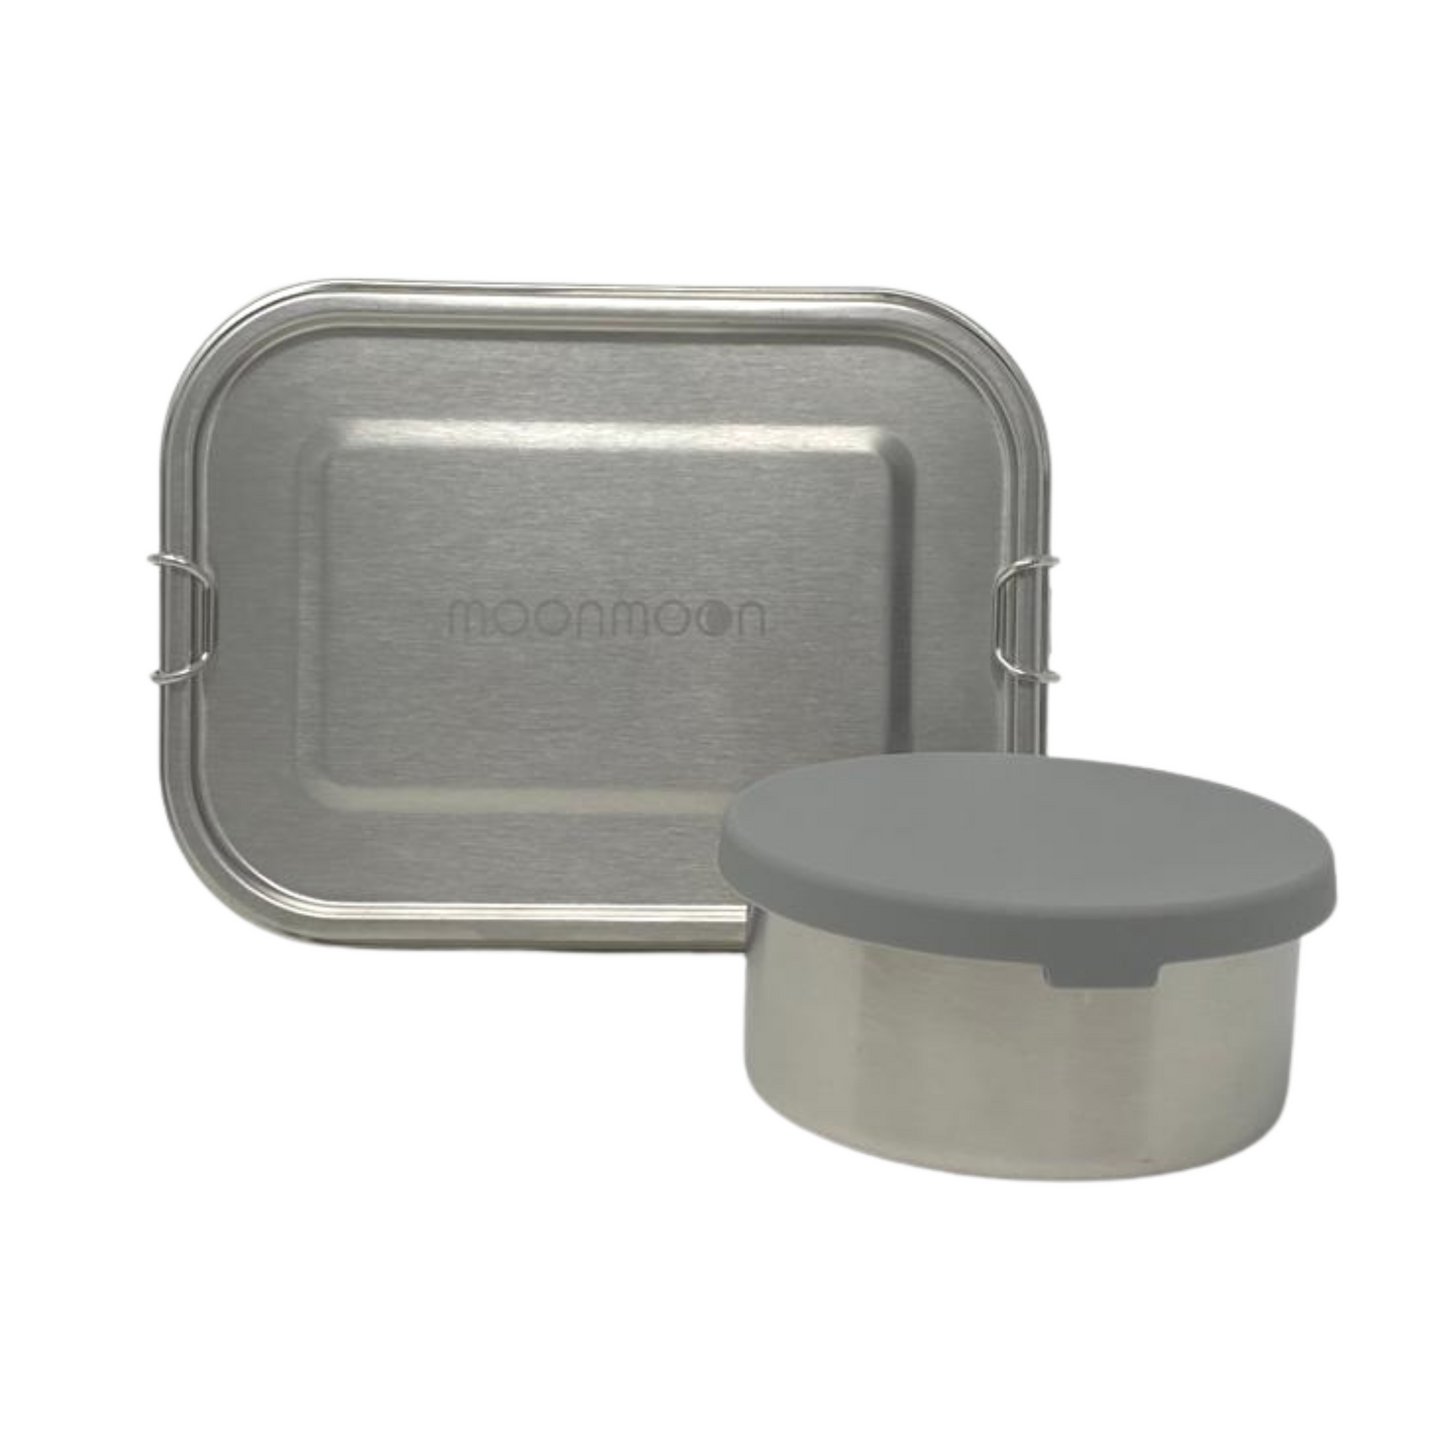 Moonmoon stainless steel lunch box, metal lunch box uk stainless steel bento lunch box stainless steel bento box metal bento box bento lunch box stainless , stainless steel pot Containers for lunch boxes snack boxes for kids stainless steel